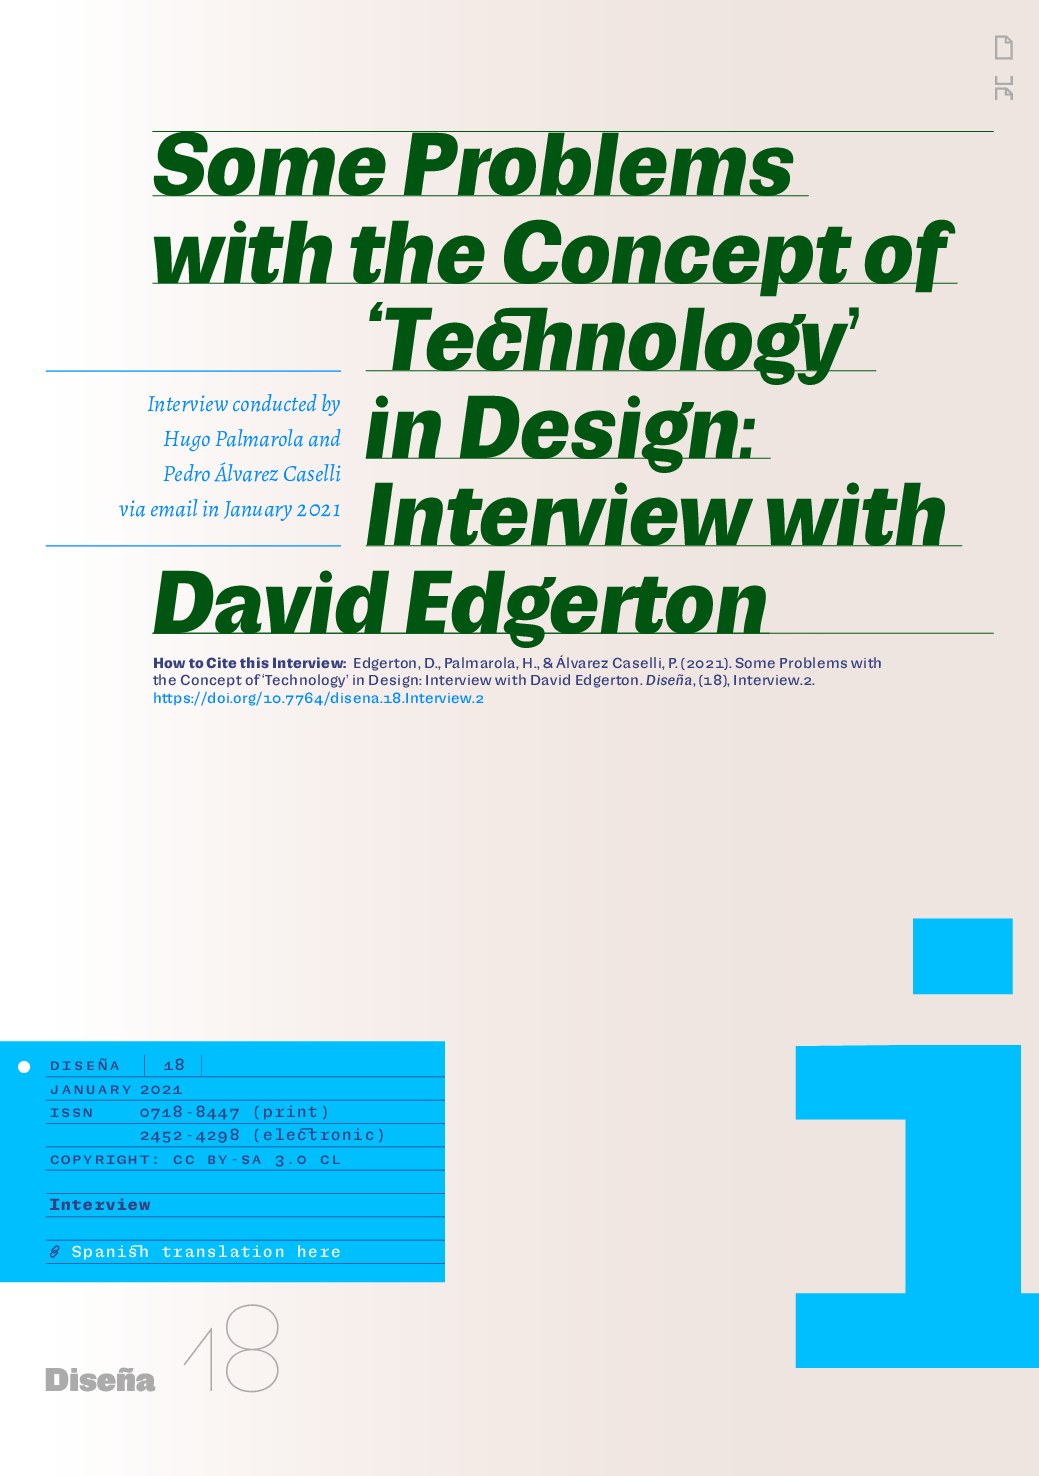 Some Problems with the Concept of 'Technology' in Design: Interview with David Edgerton